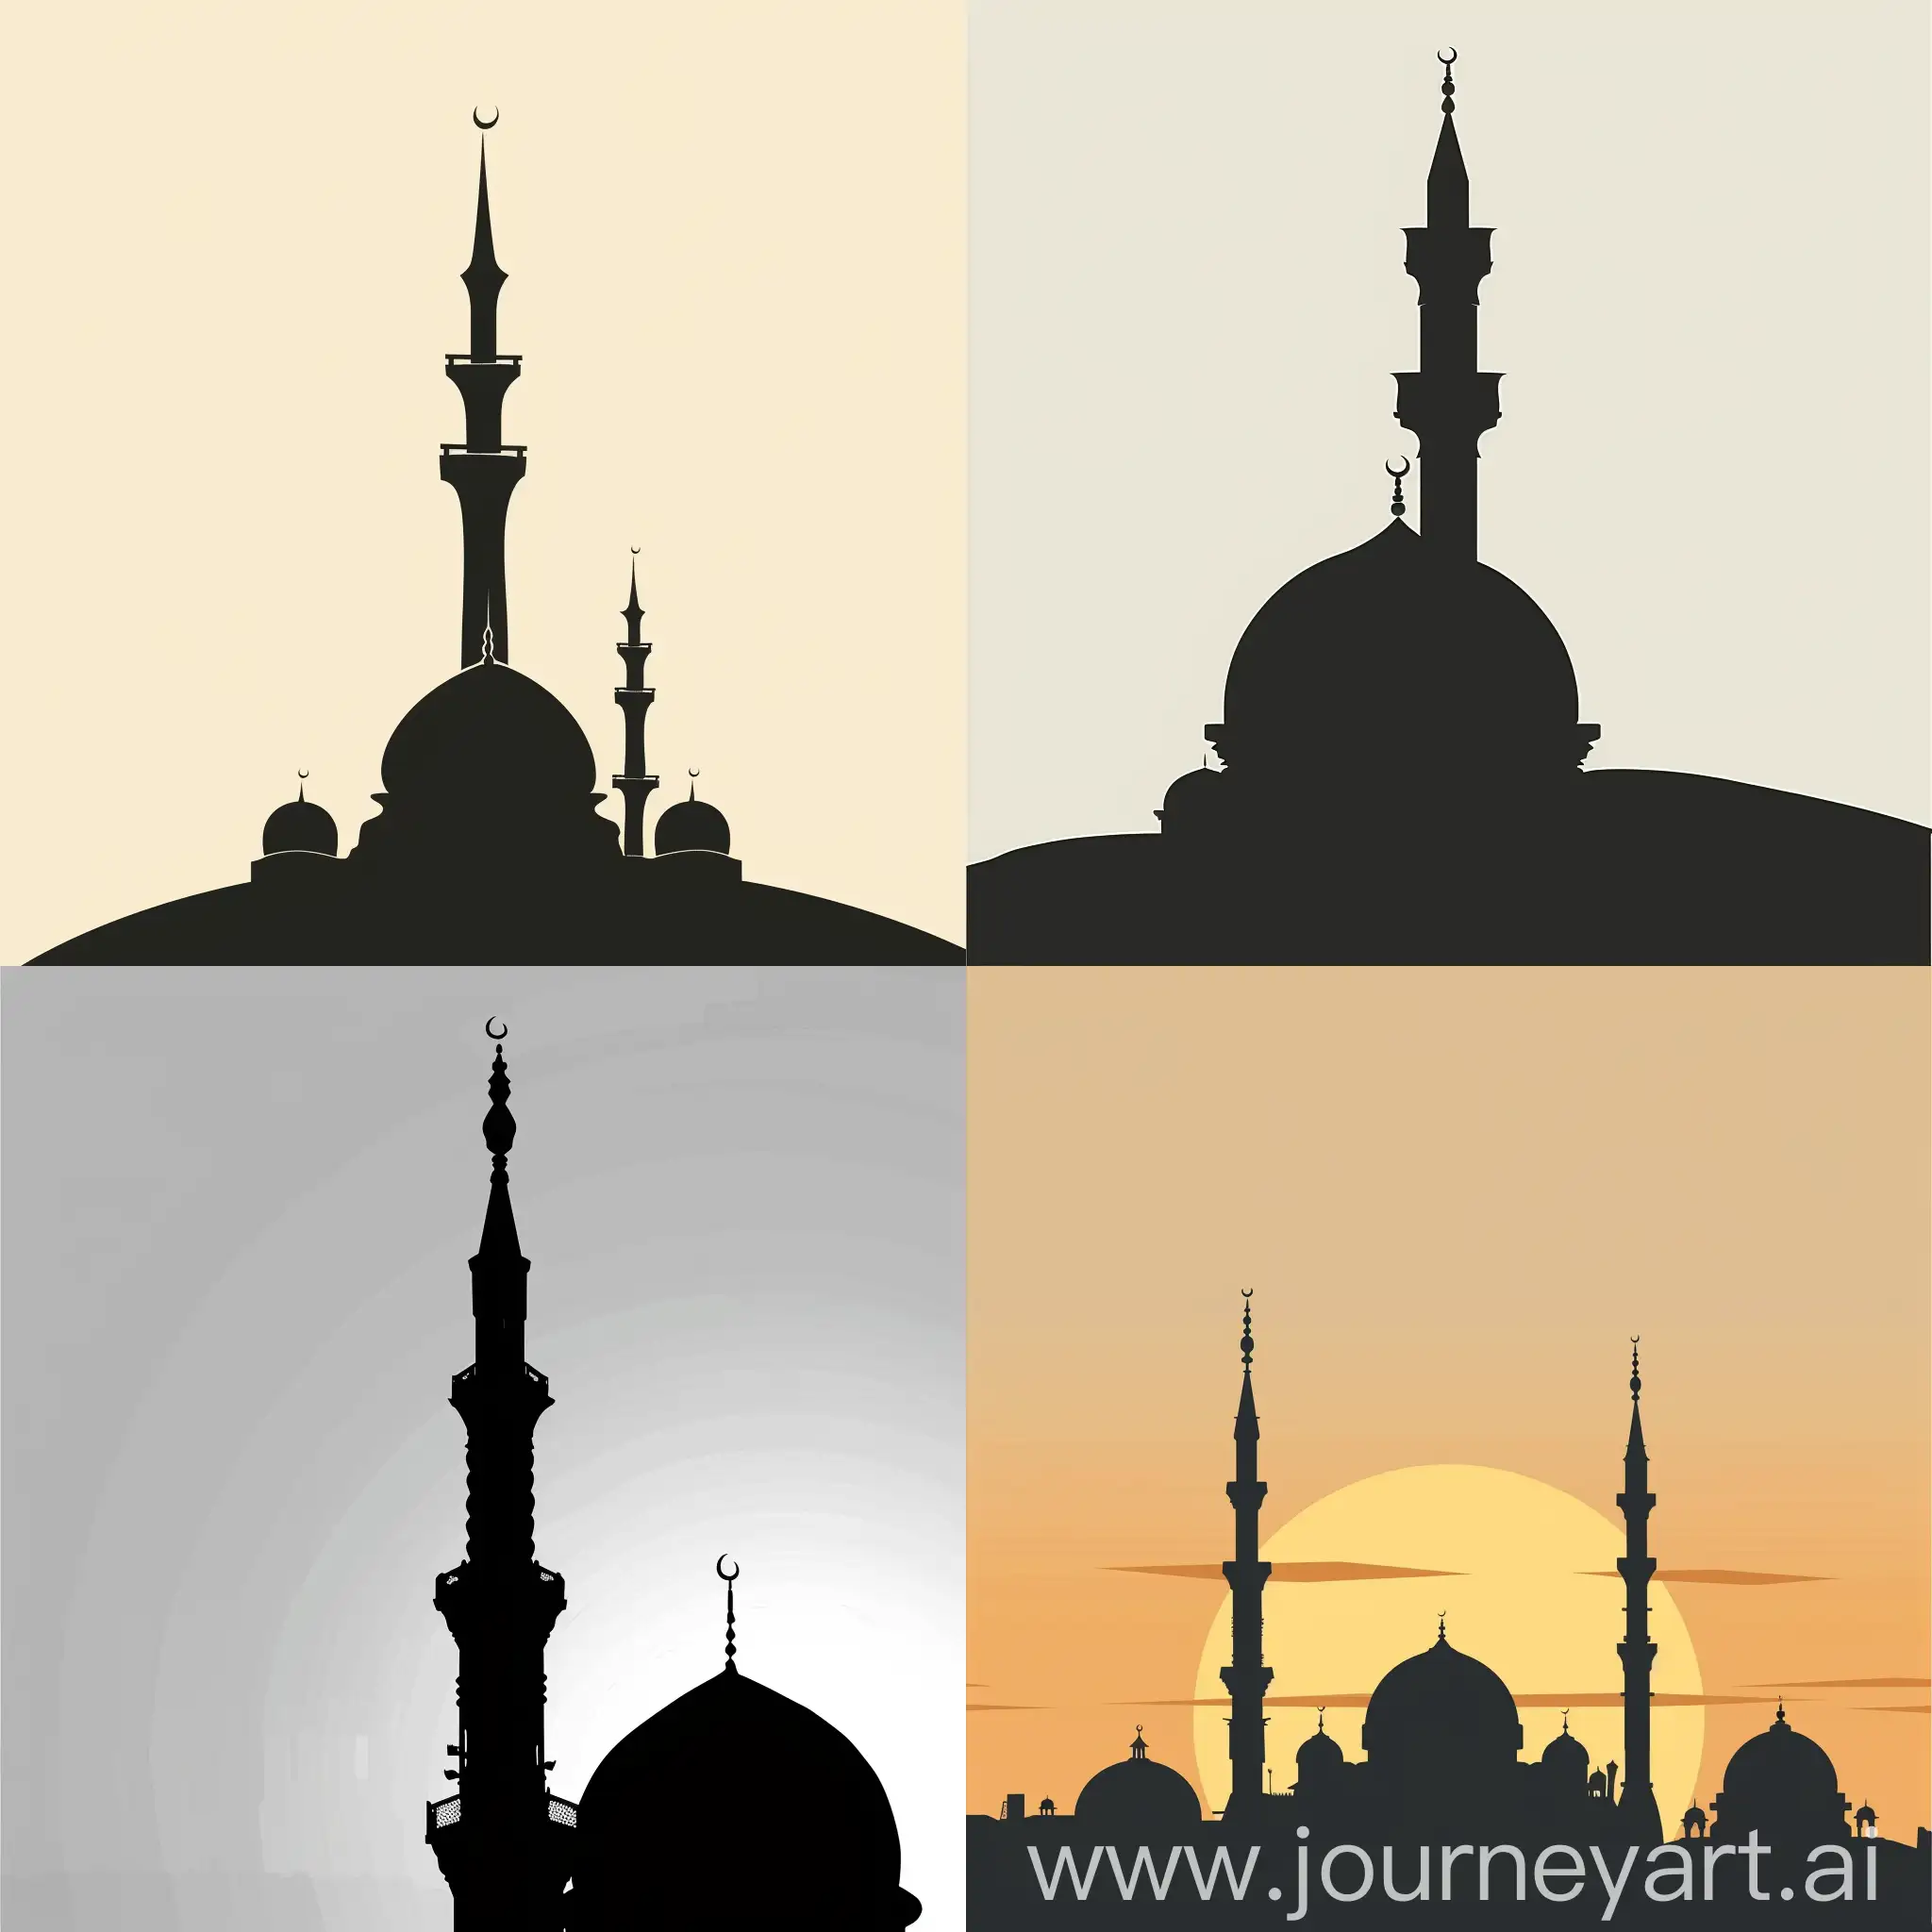 Silhouette-Mosque-Dome-with-Minaret-Vector